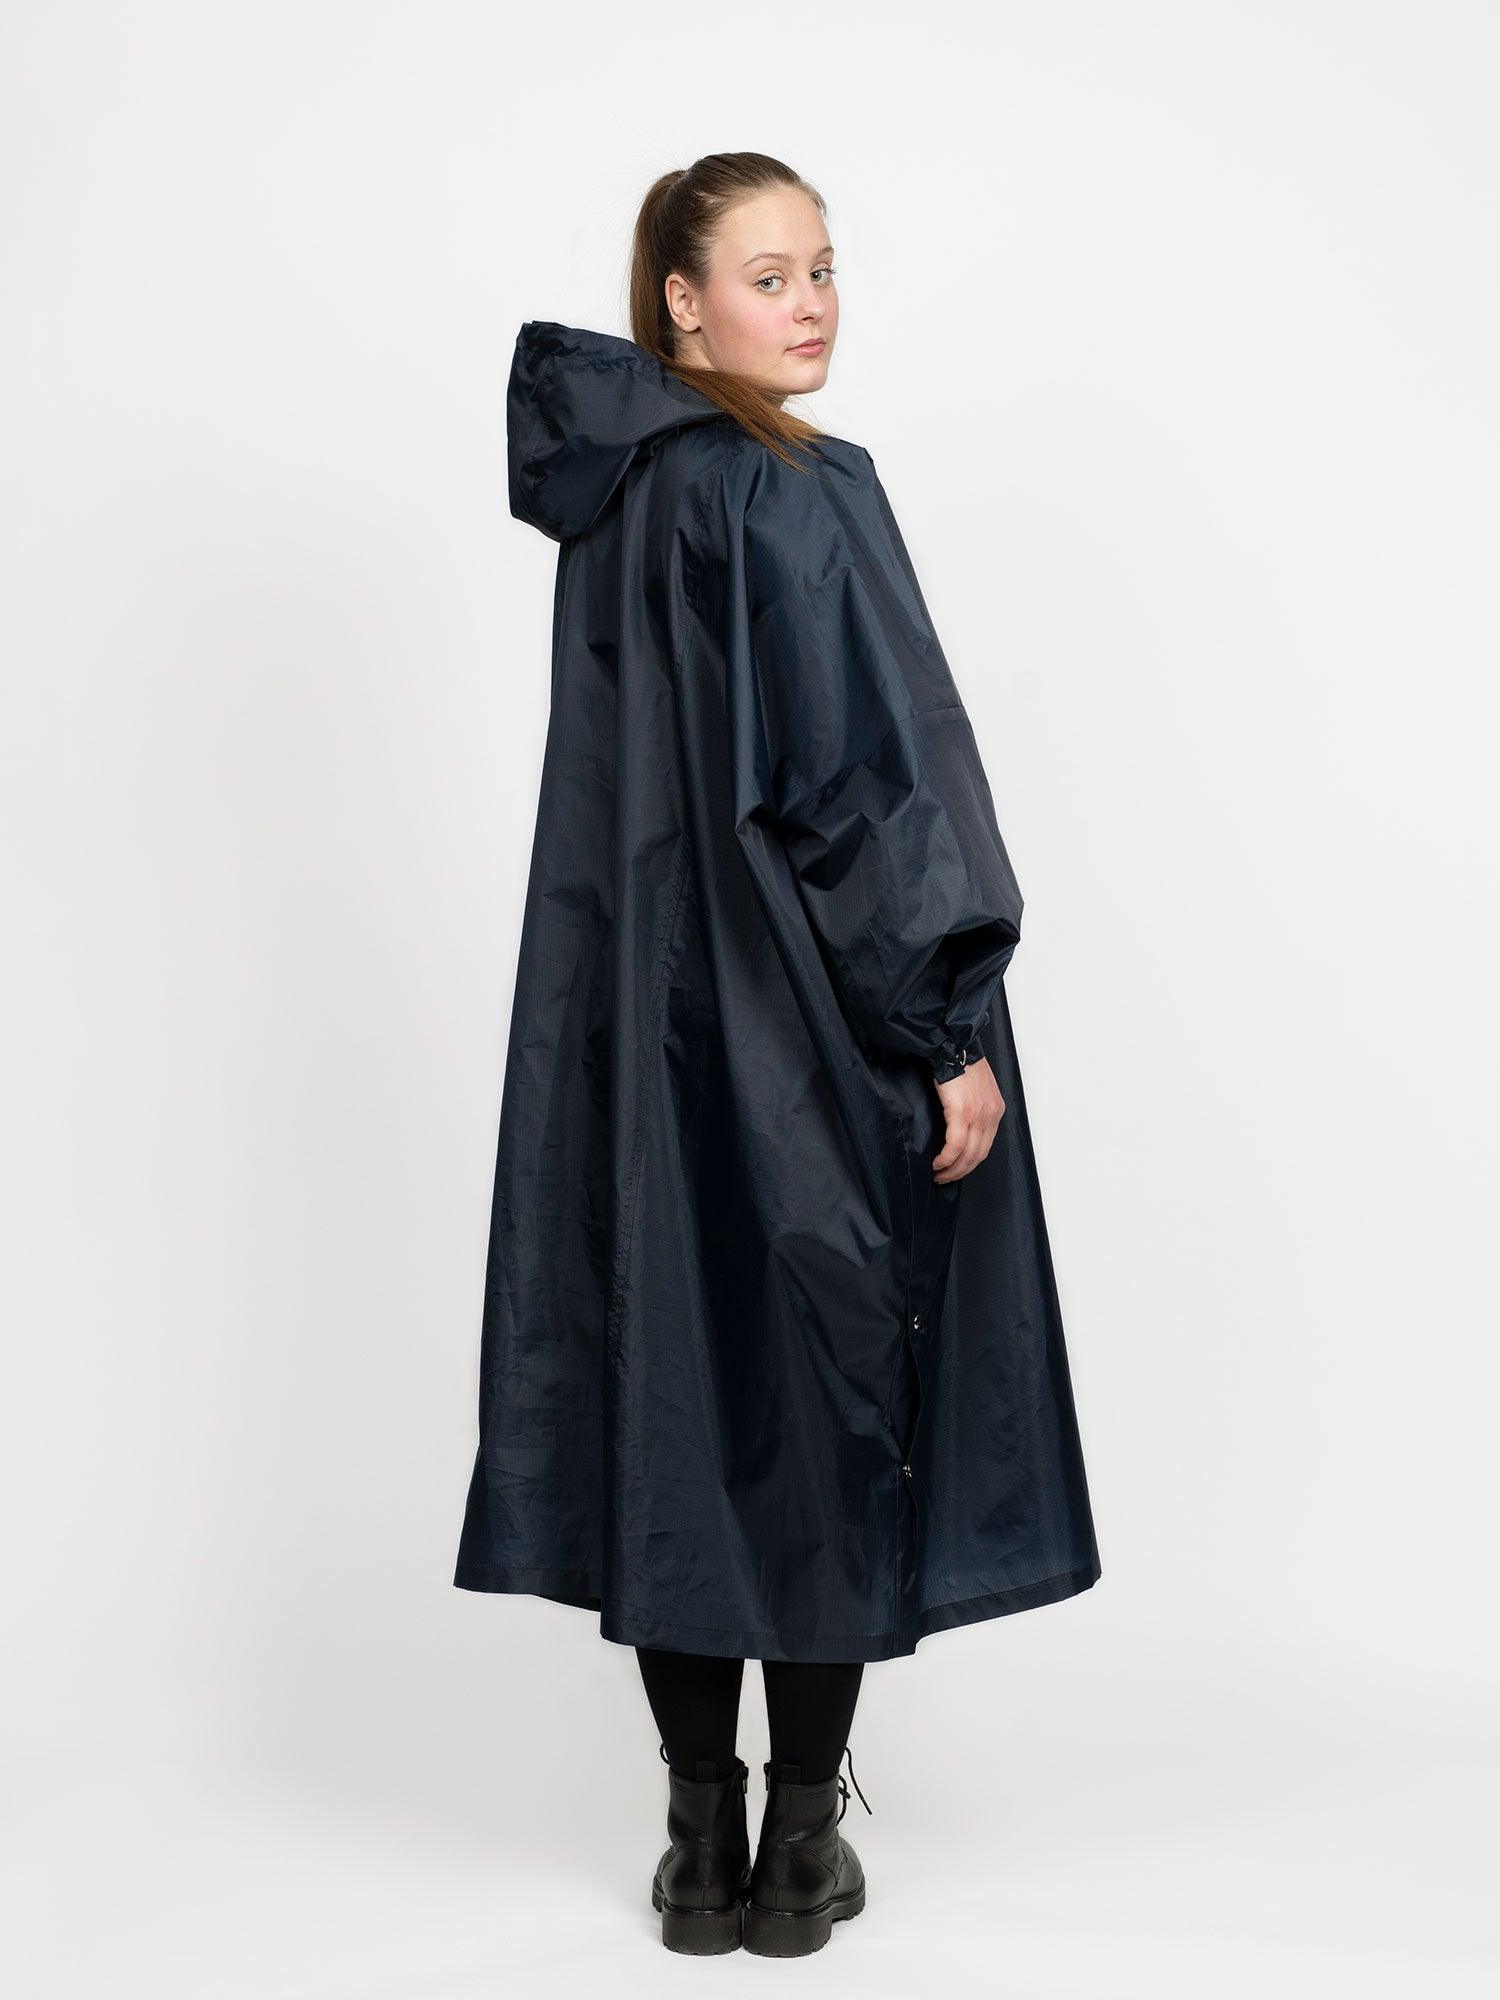 HOODIE PONCHO SEWING PATTERN– The Assembly Line shop